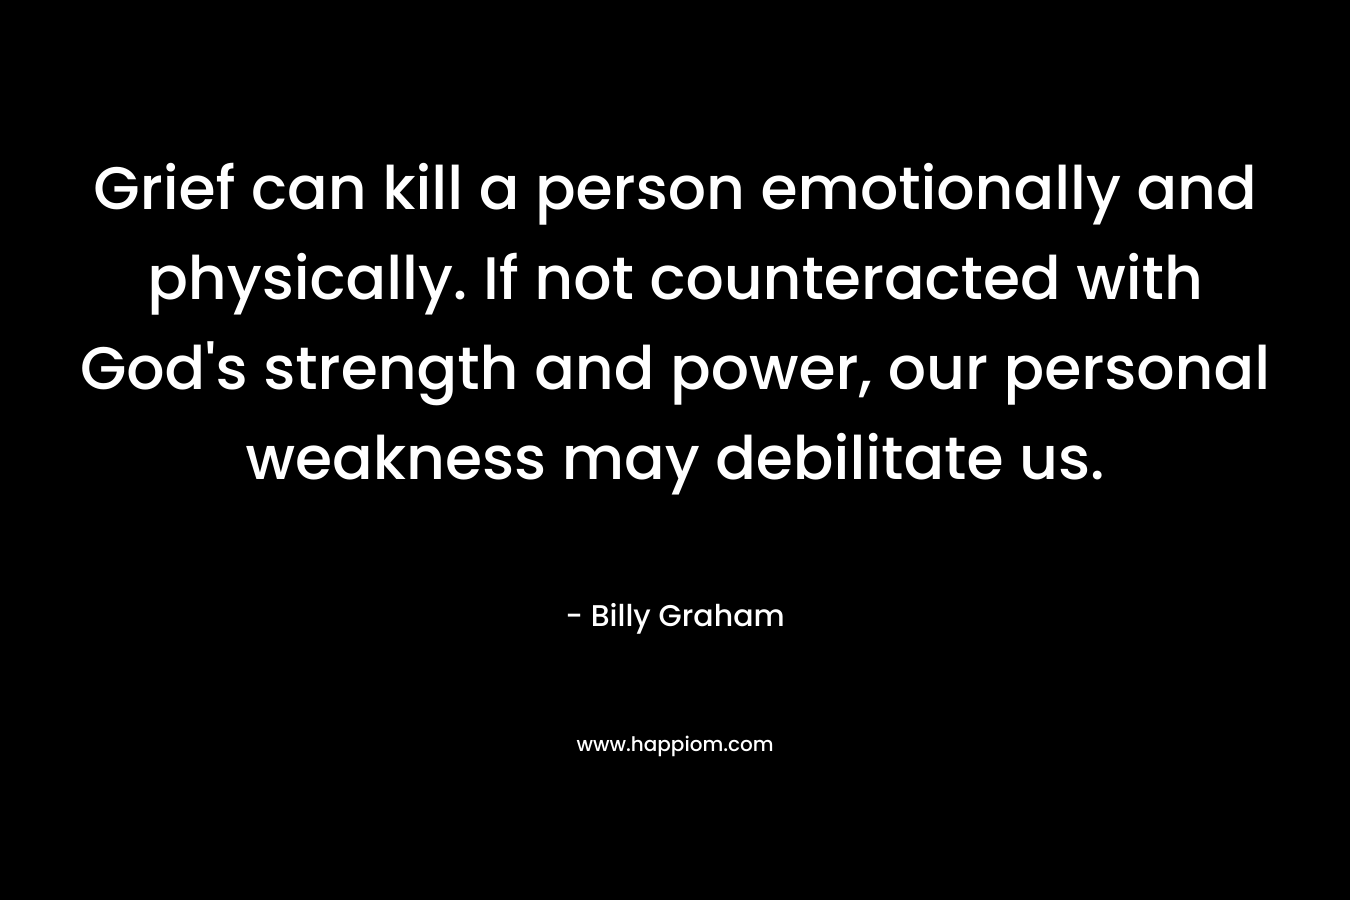 Grief can kill a person emotionally and physically. If not counteracted with God’s strength and power, our personal weakness may debilitate us. – Billy Graham